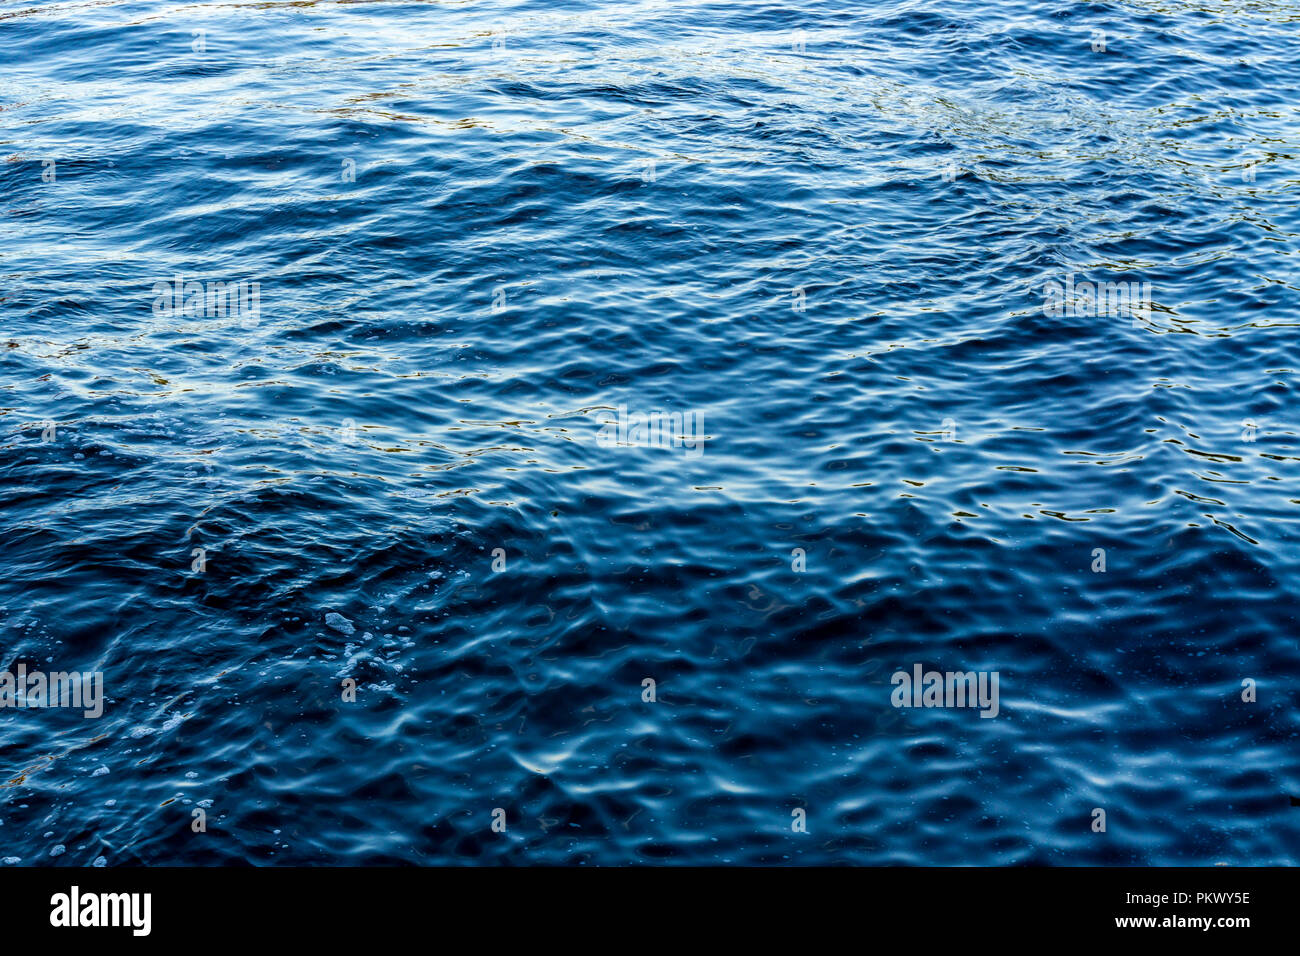 Berlin, Germany, September 04, 2018: Close-Up of Rippled Water of River Stock Photo